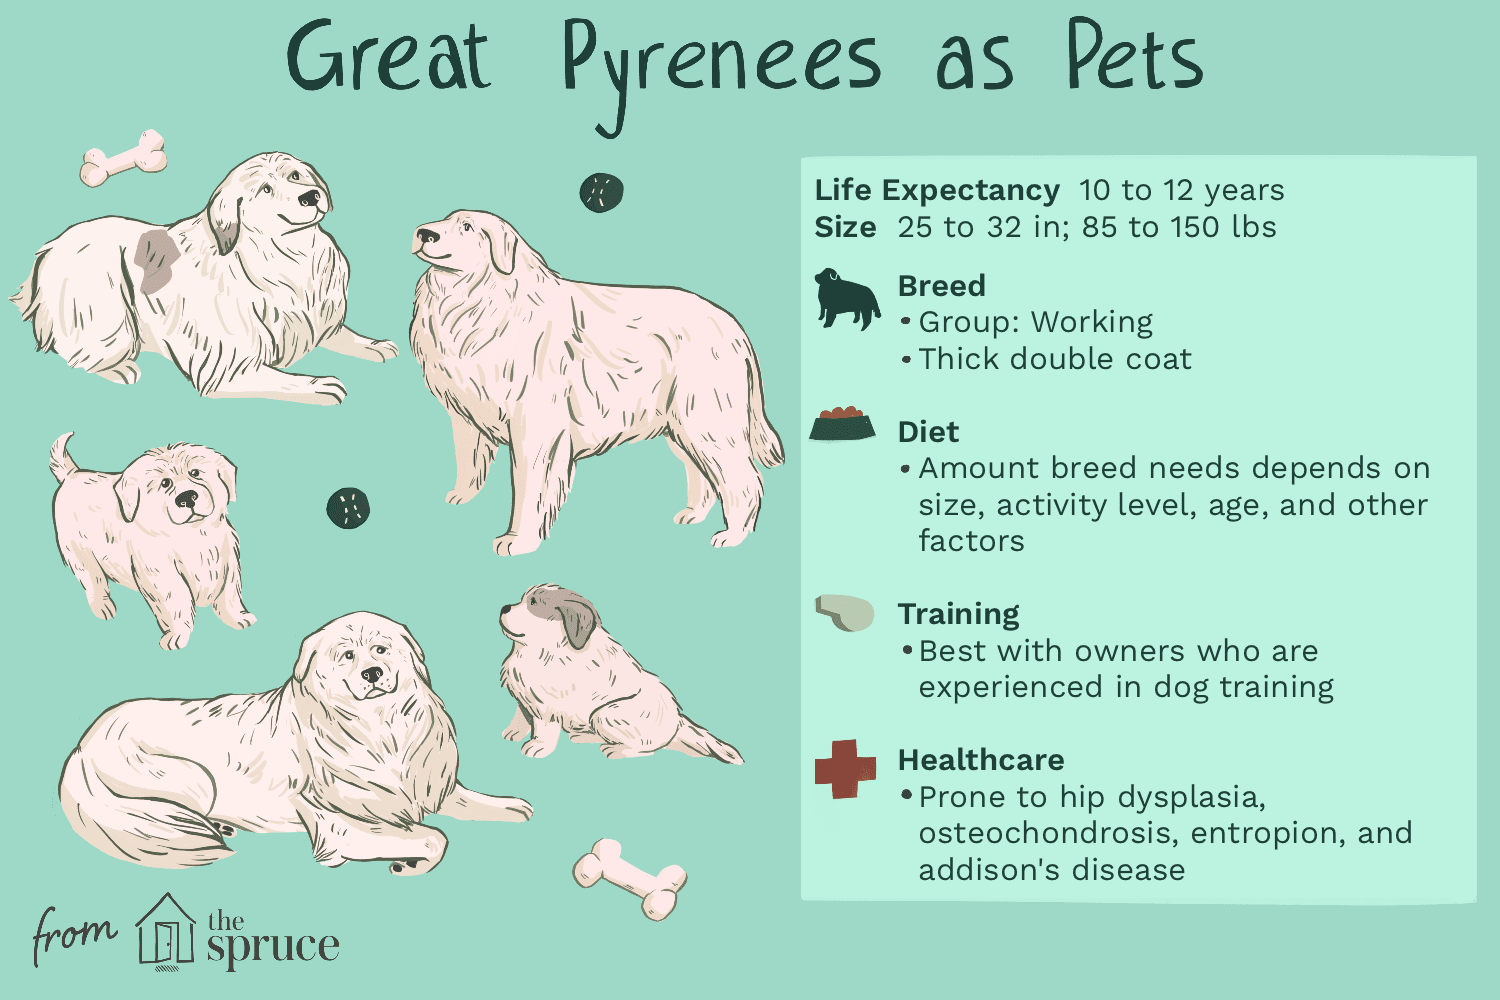 great pyrenees as pets illustration